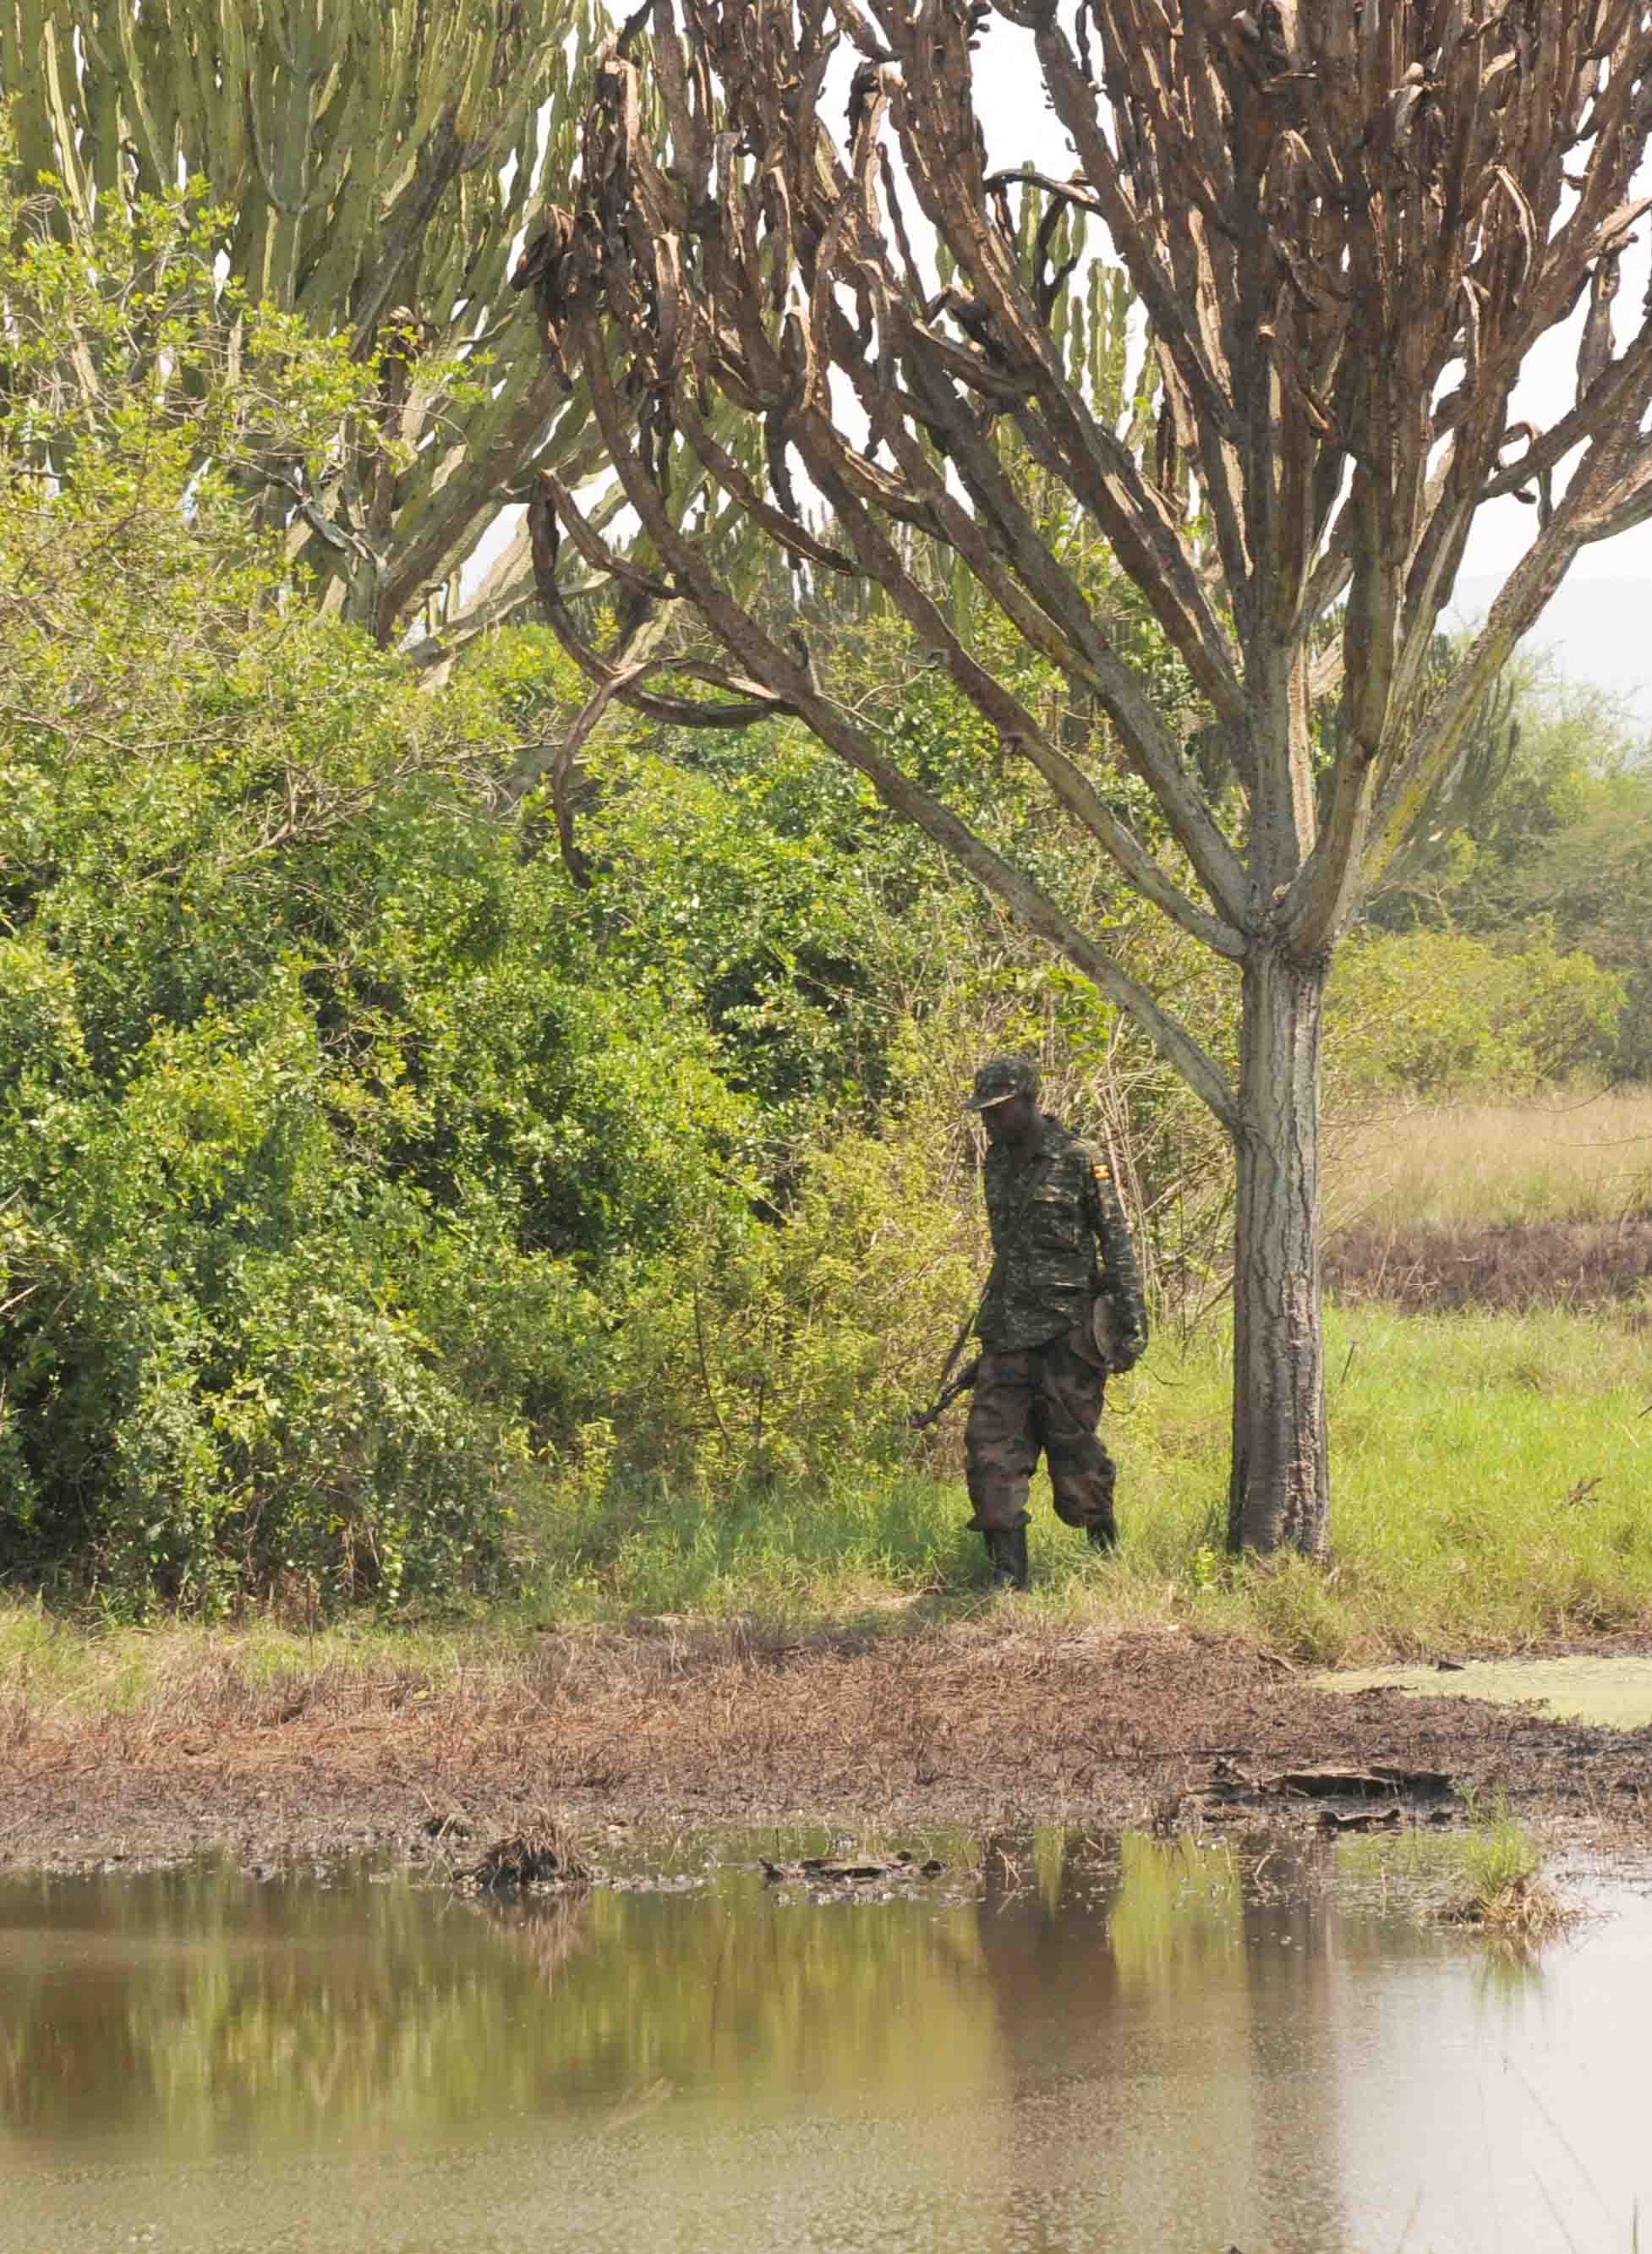 Image: Patrol at a waterhole (credit: Dr Andrew Plumptre, Wildlife Conservation Society)